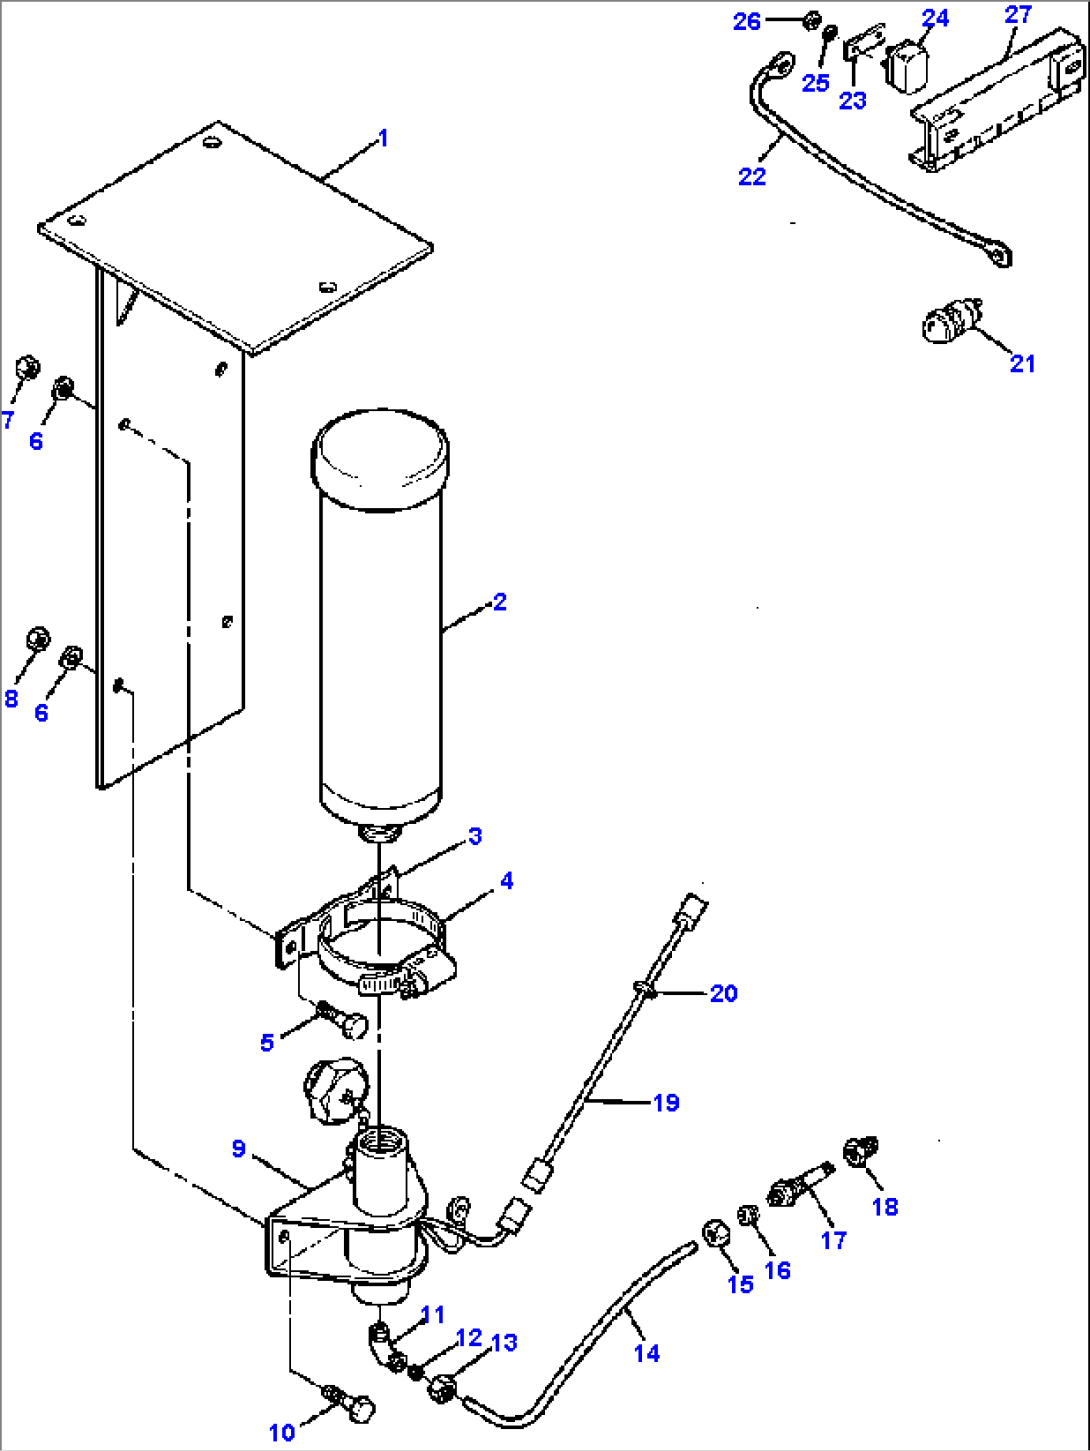 FIG. B5190-01A0 EHTER INJECTION STARTING AID